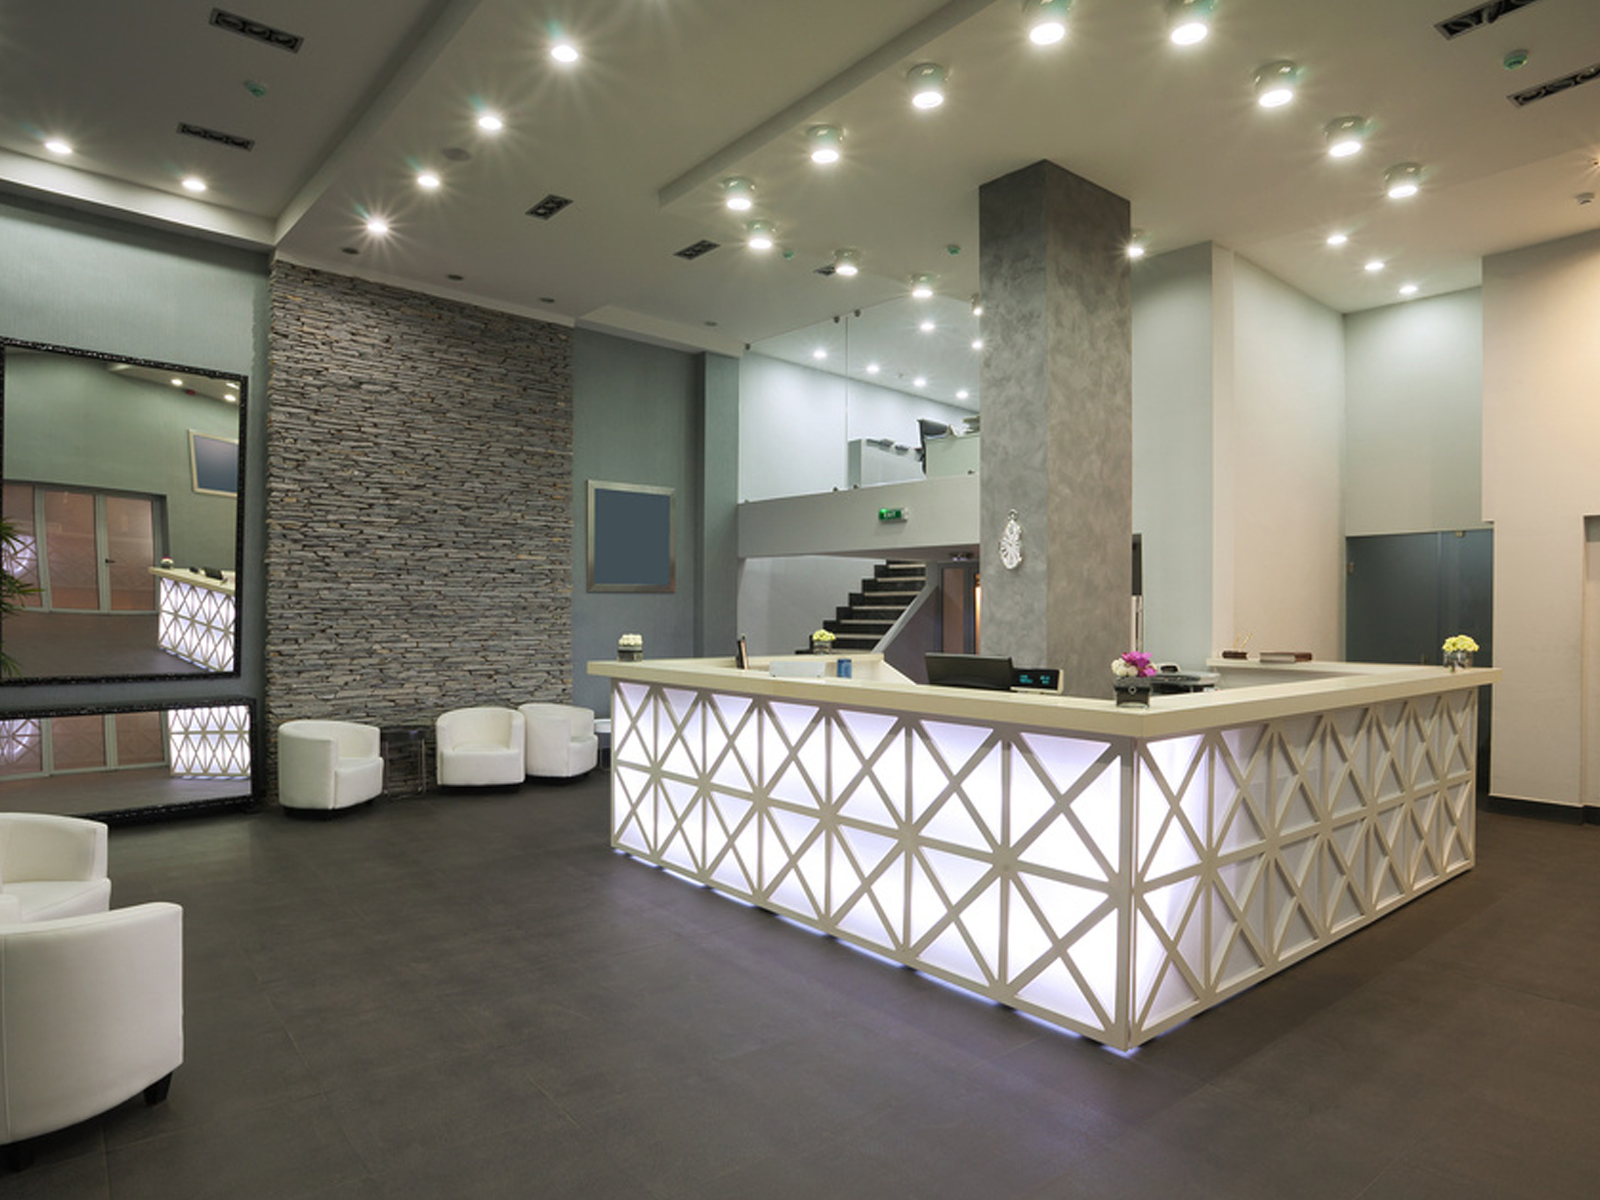 How to Create a Welcoming Reception Area | NewSpace Business Interiors